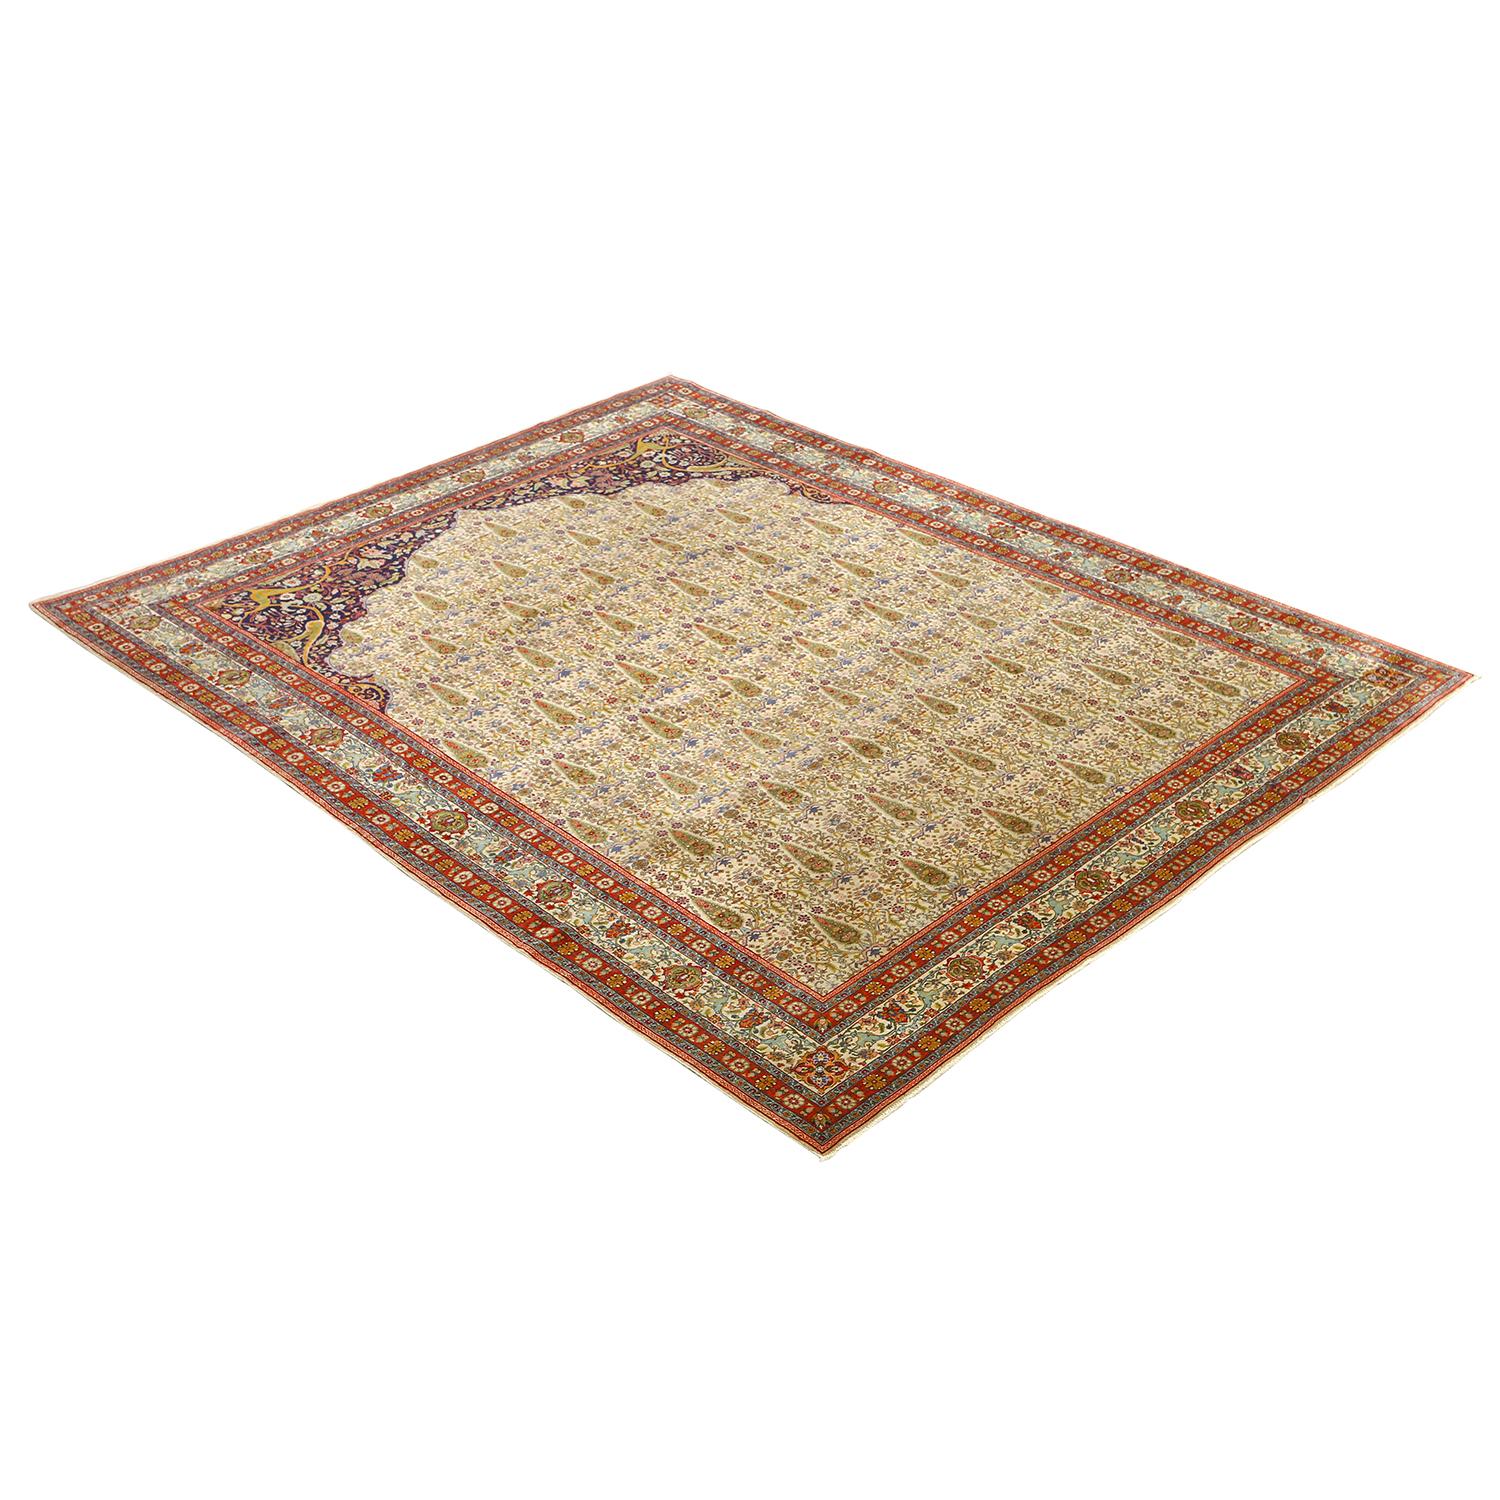 This Antique Tabriz Rug with a Prayer Design is a captivating blend of artistic expression and spiritual reverence, hailing from the renowned weaving city of Tabriz in Persia. These rugs are not merely decorative; they are profound statements of